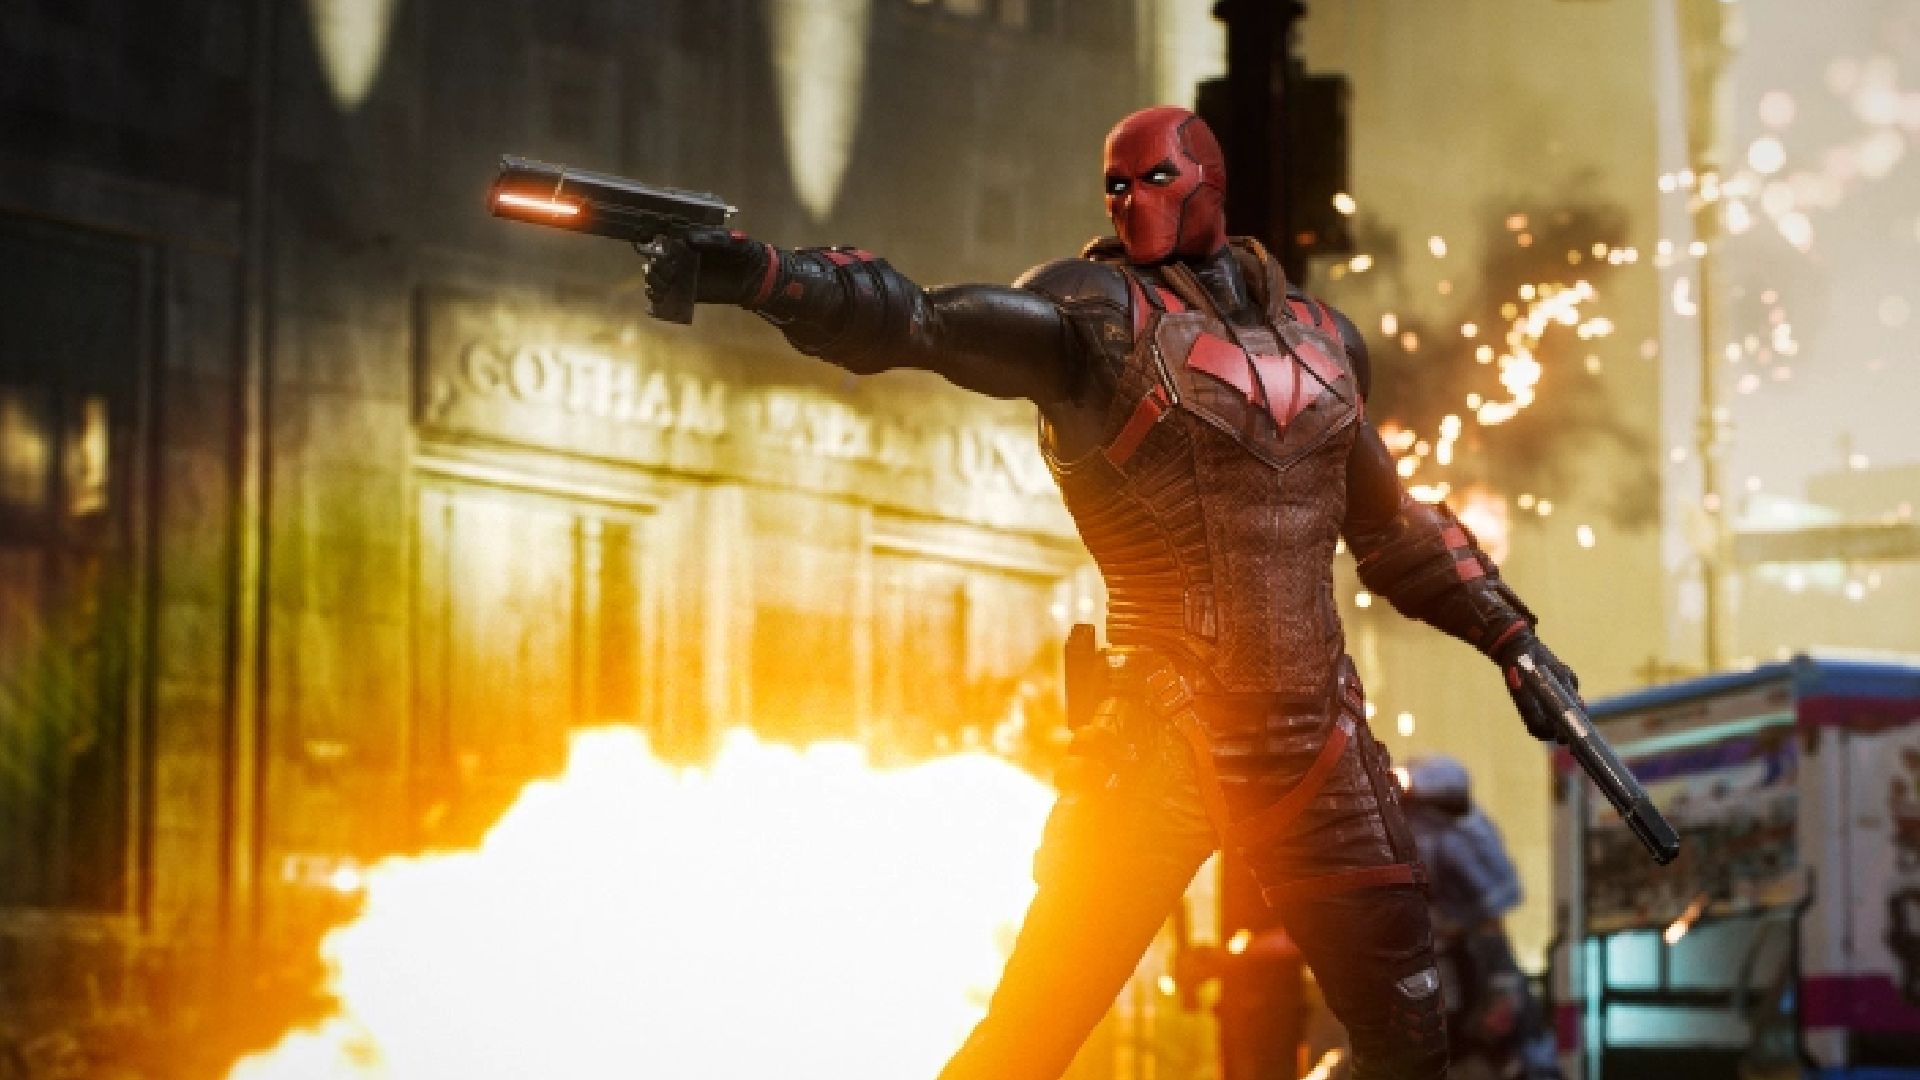 Red Hood Gotham Knights Game Wallpapers